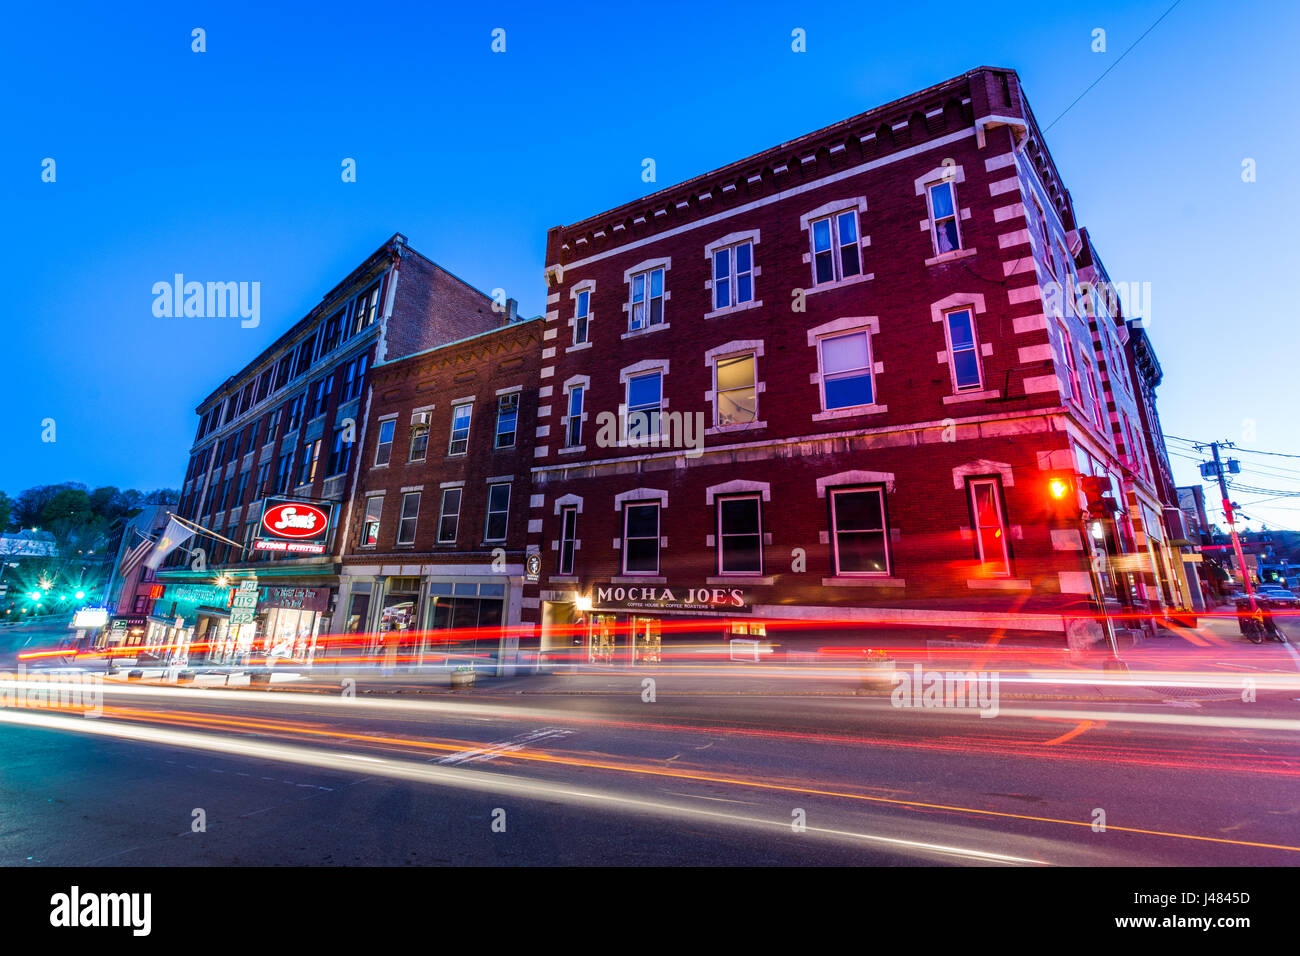 Small Cozy Downtown of Brattleboro, Vermont at Night Stock Photo